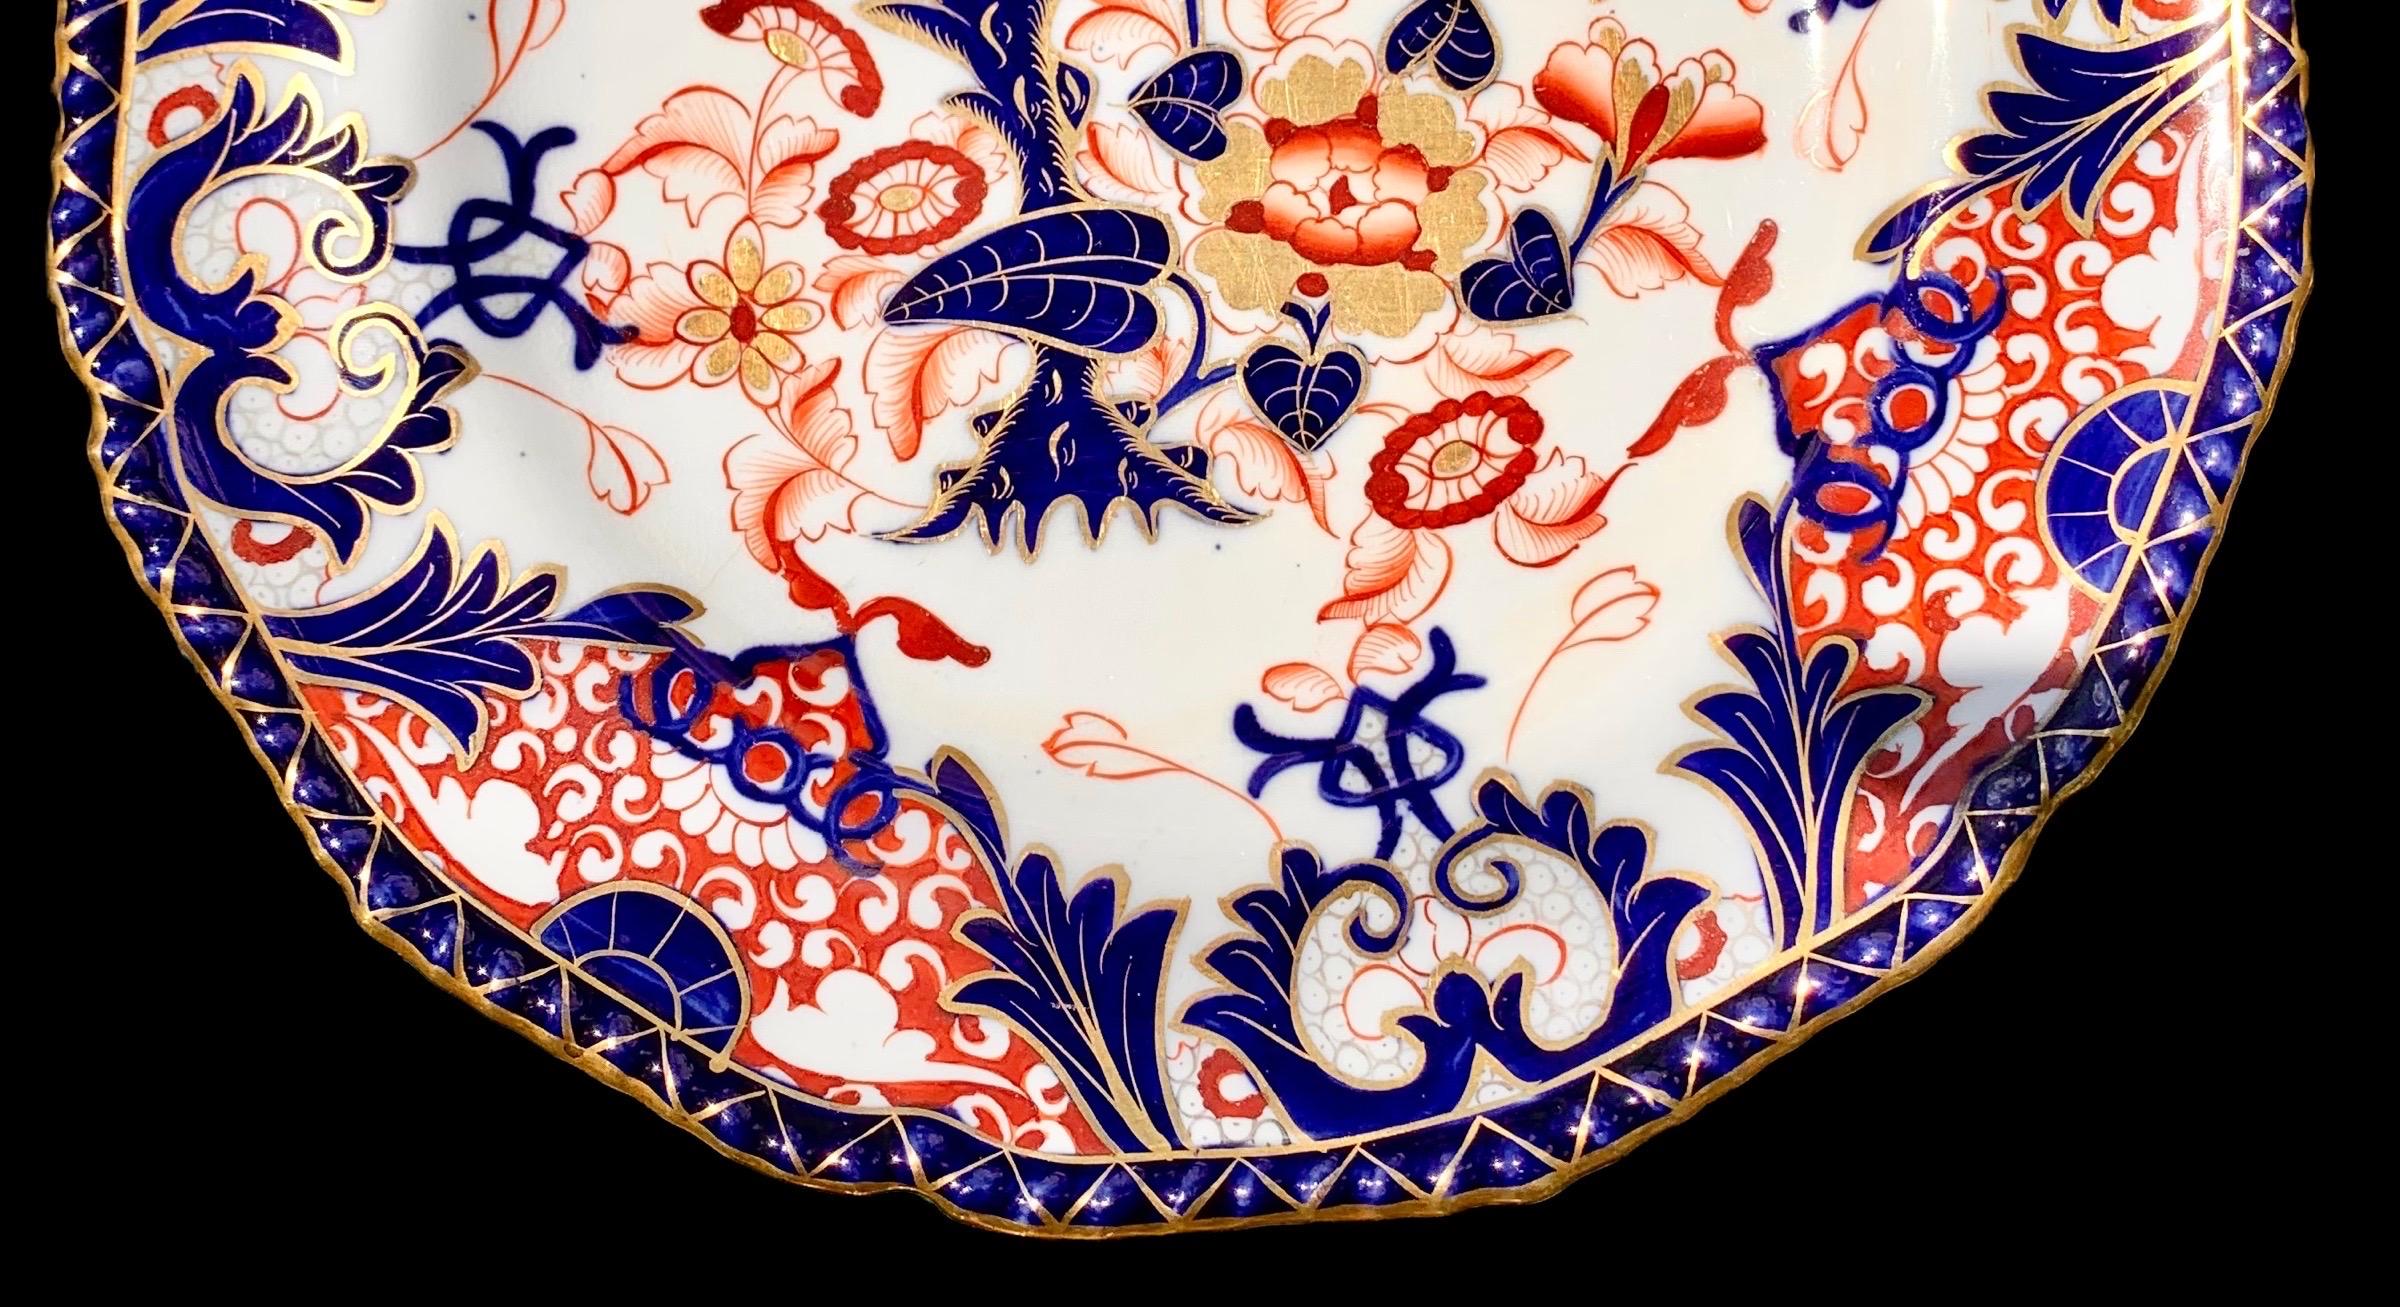 A set of six Mason's ironstone Imari Plates, early 19th century, with lovely scalloped, embossed and gilt decorated dinner plates in the typical Imari colors of red, orange, cobalt and white with leaf and floral decoration.

Set a lovely table-scape